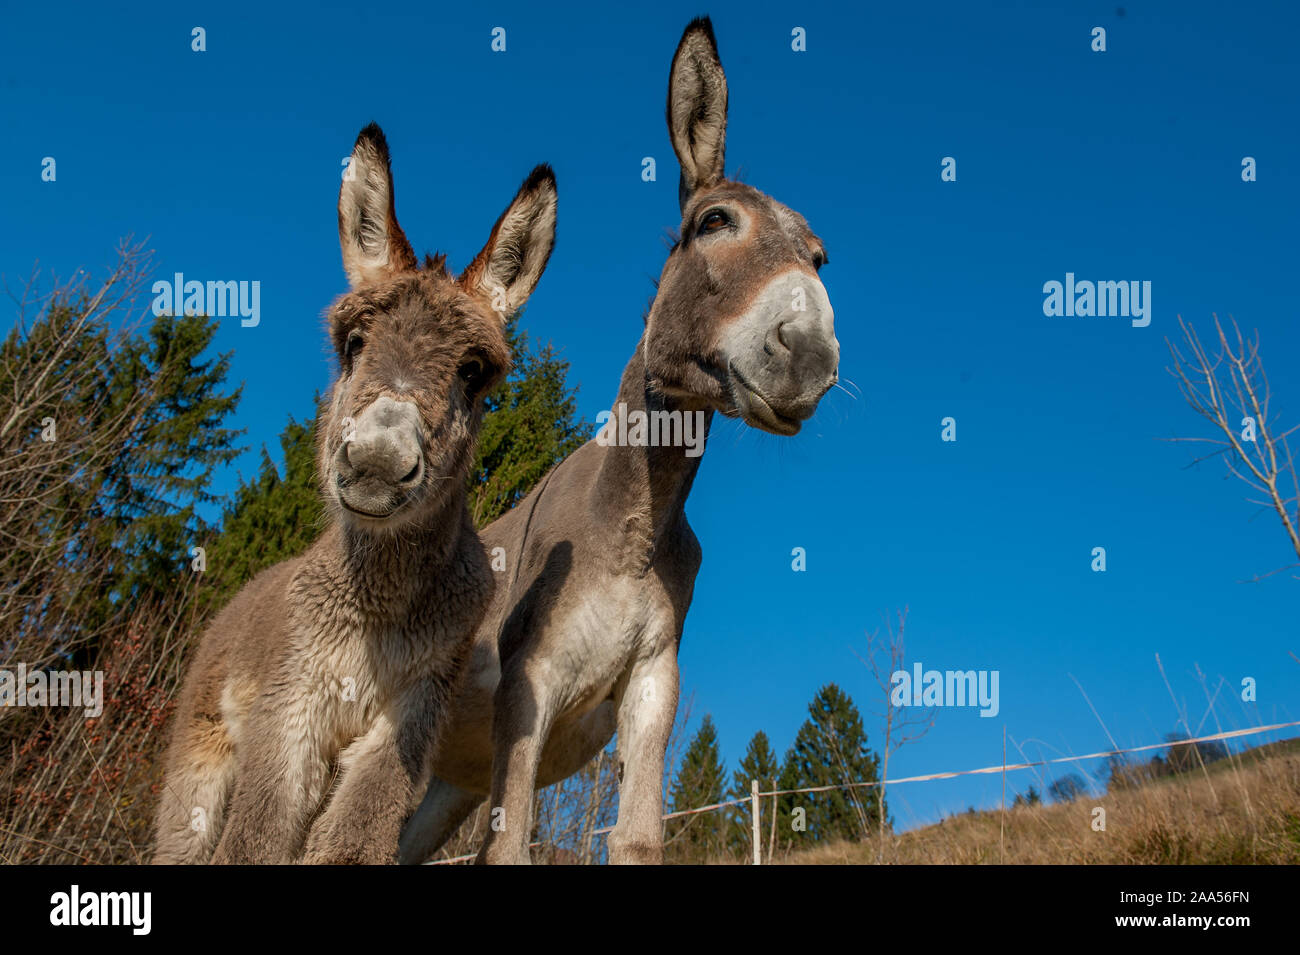 donkeys grazing in freedoma,s,d,f Stock Photo